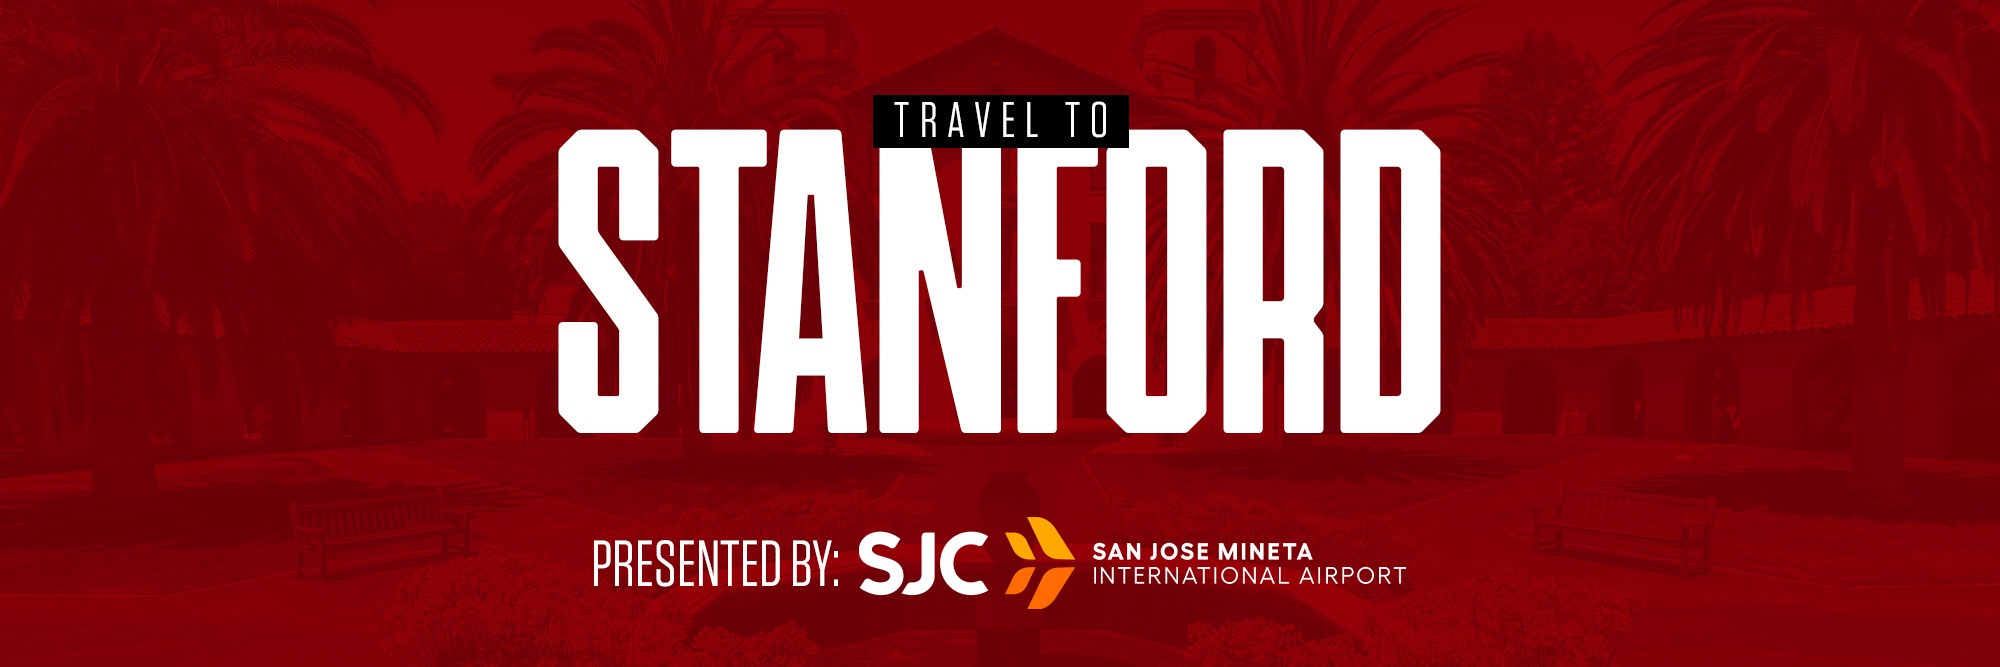 Travel to Stanford